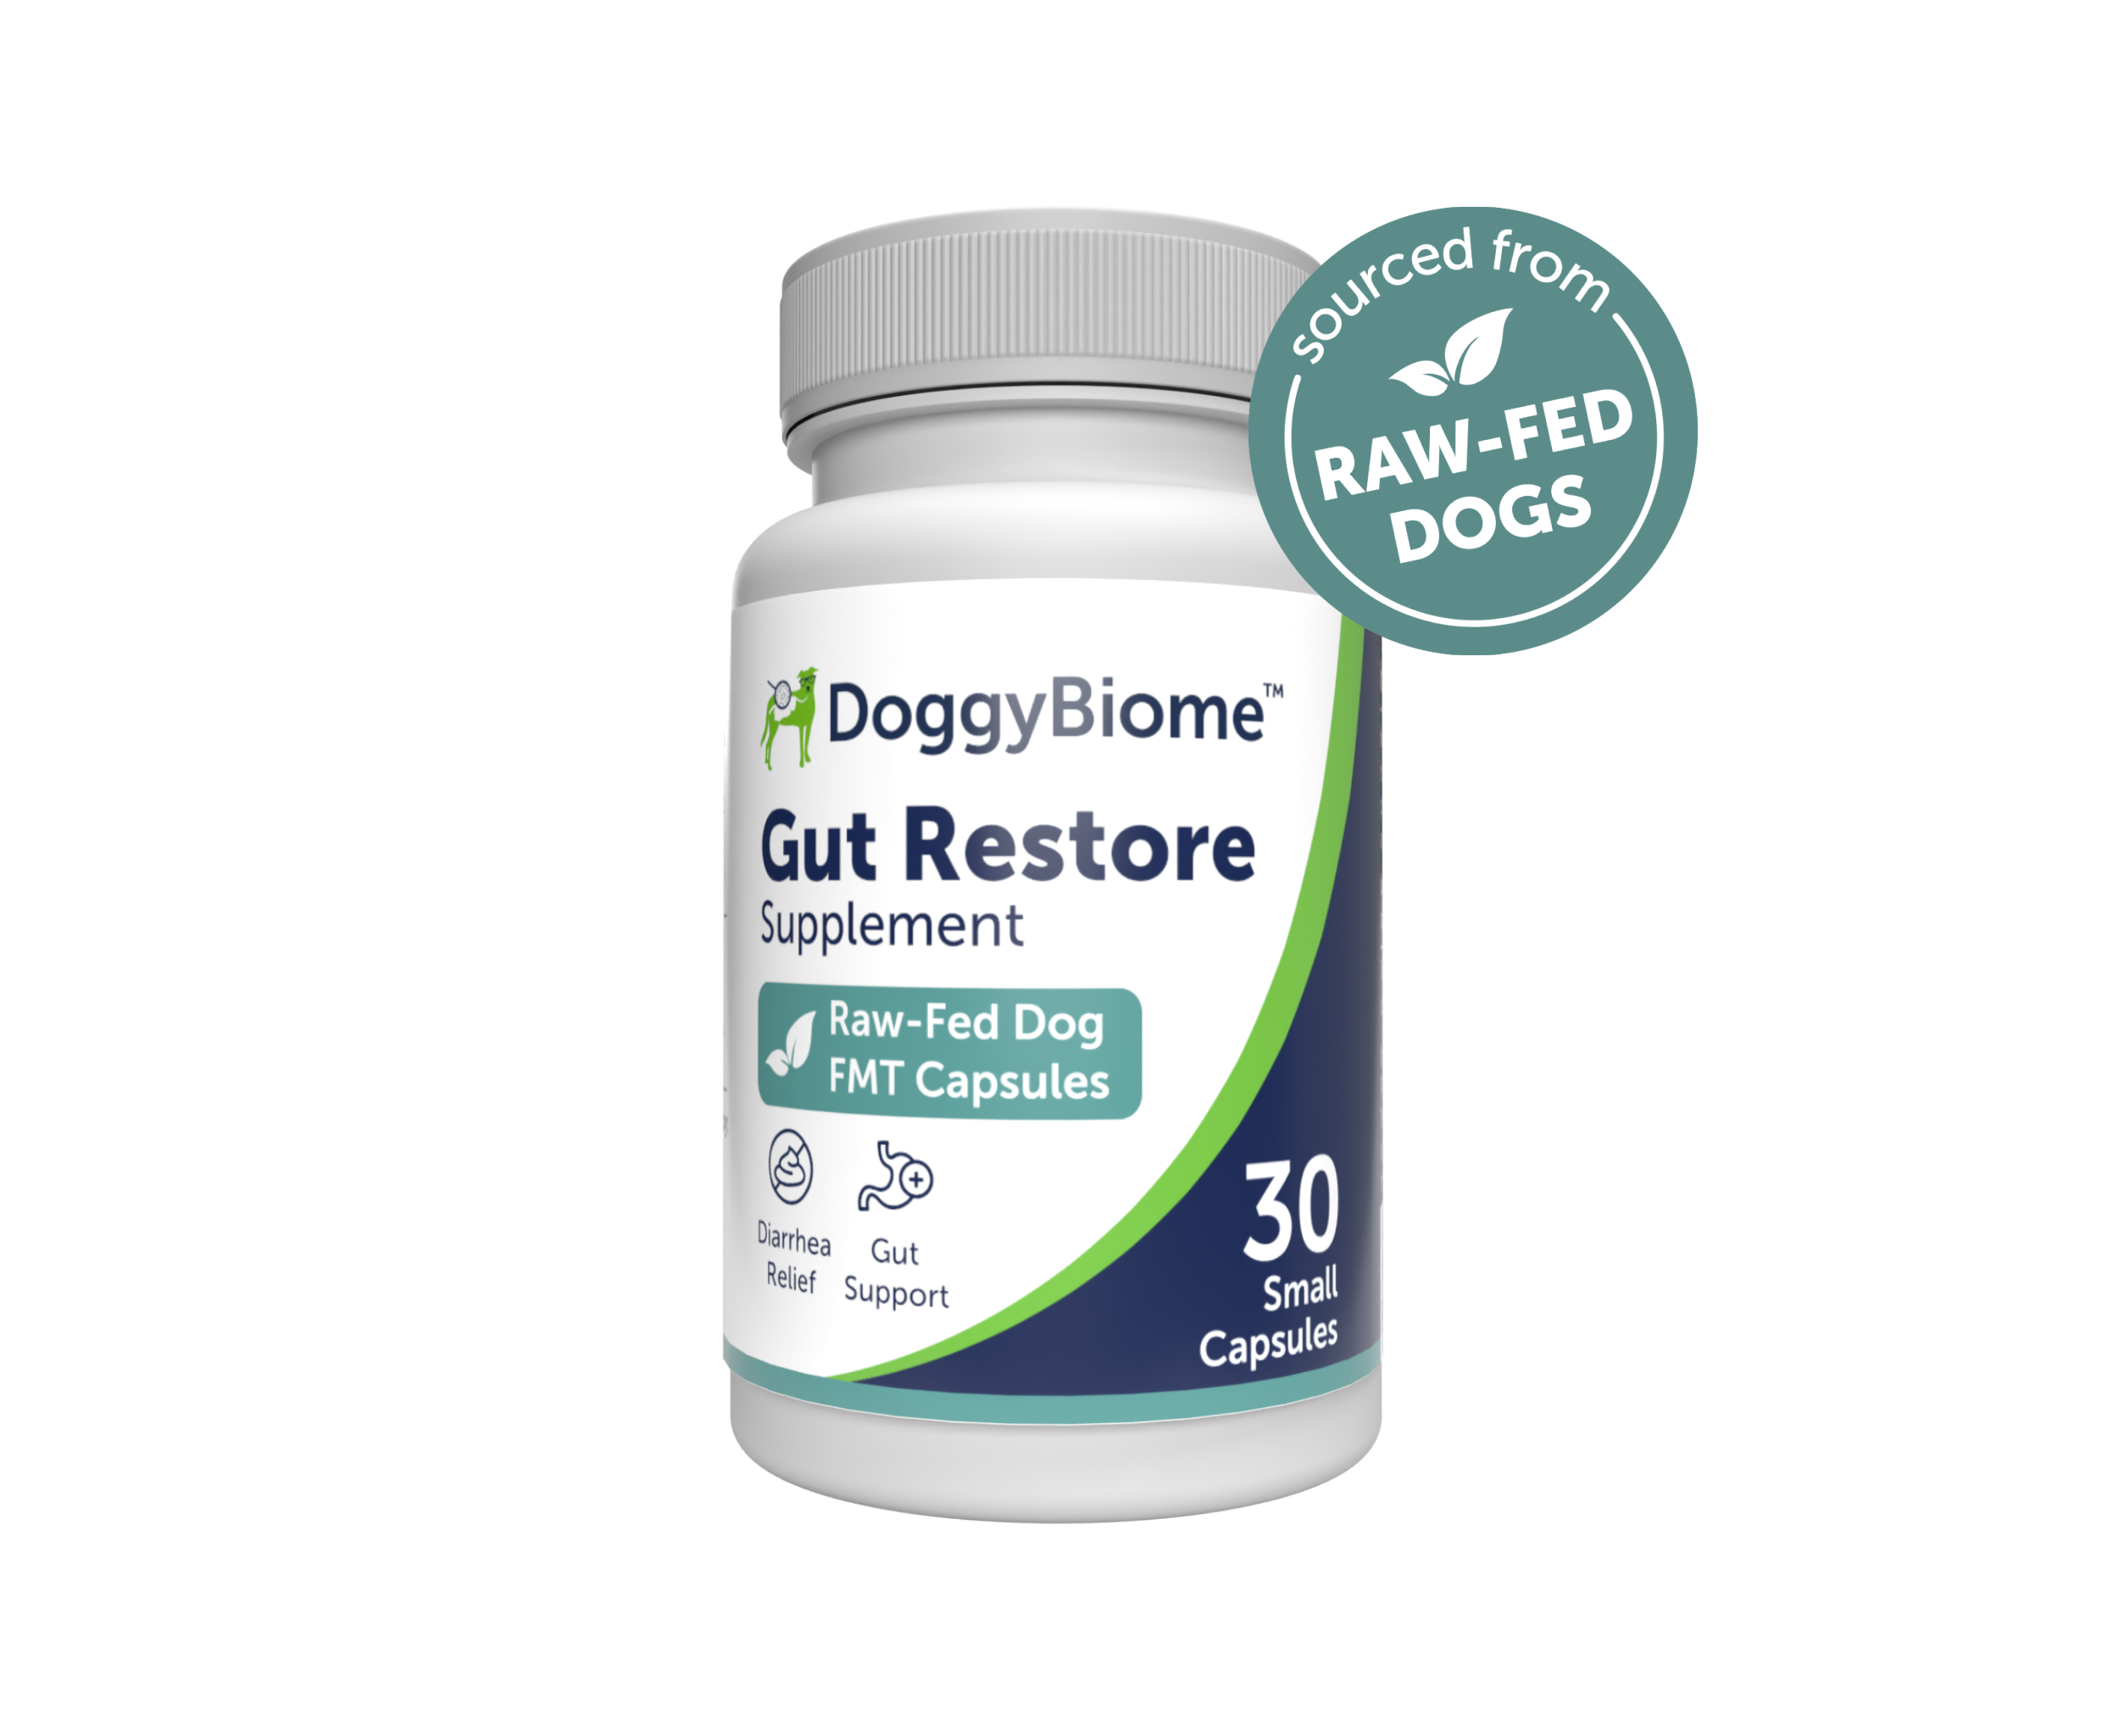 DoggyBiome™ Gut Restore Supplement from Raw-Fed Dogs